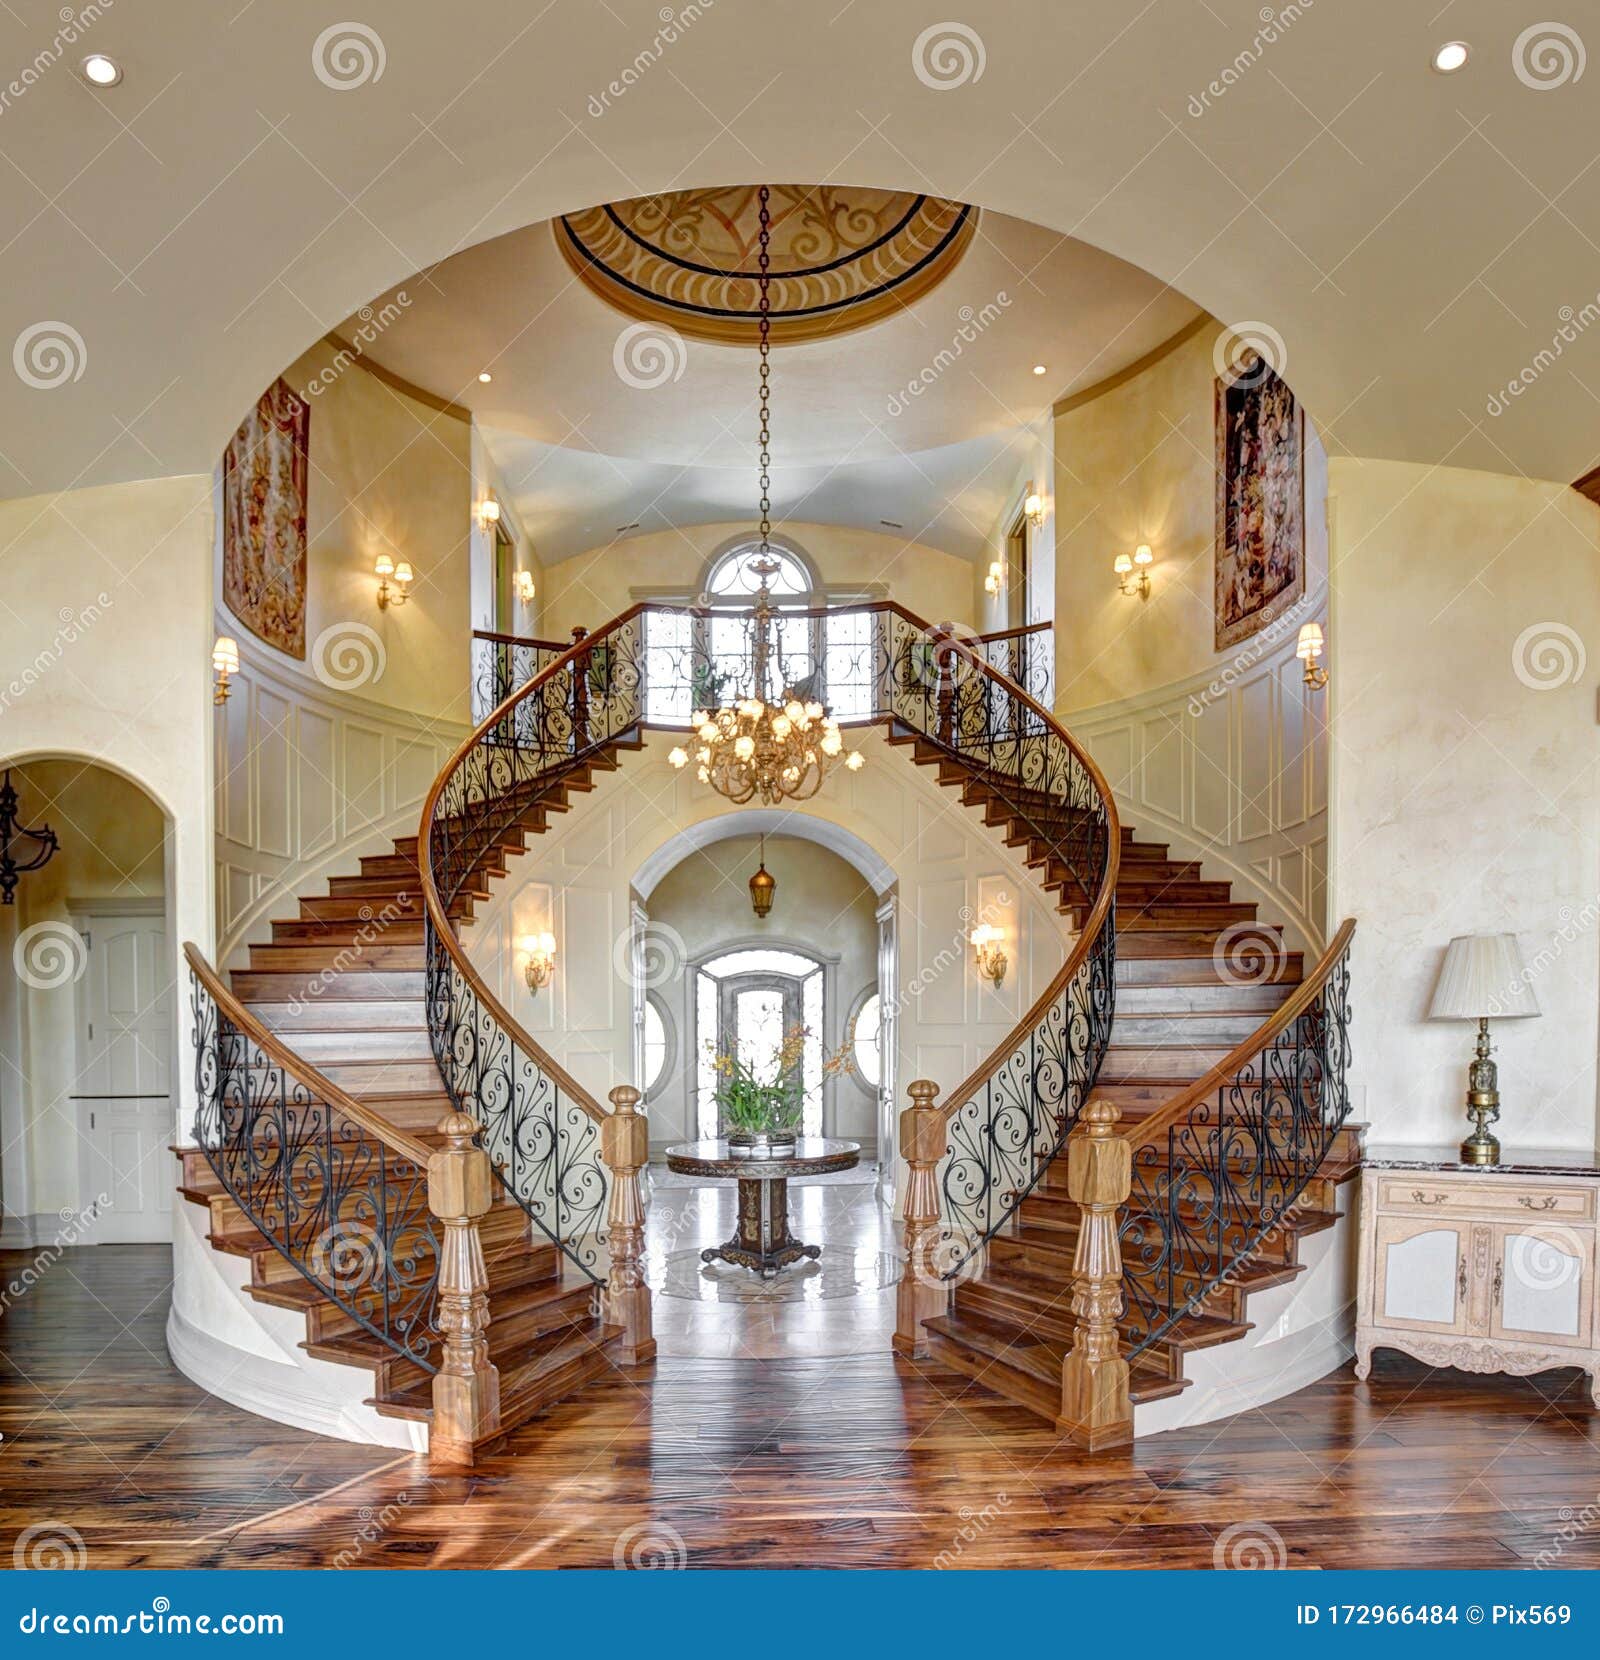 the curved dual grand staircase in an upscale home.